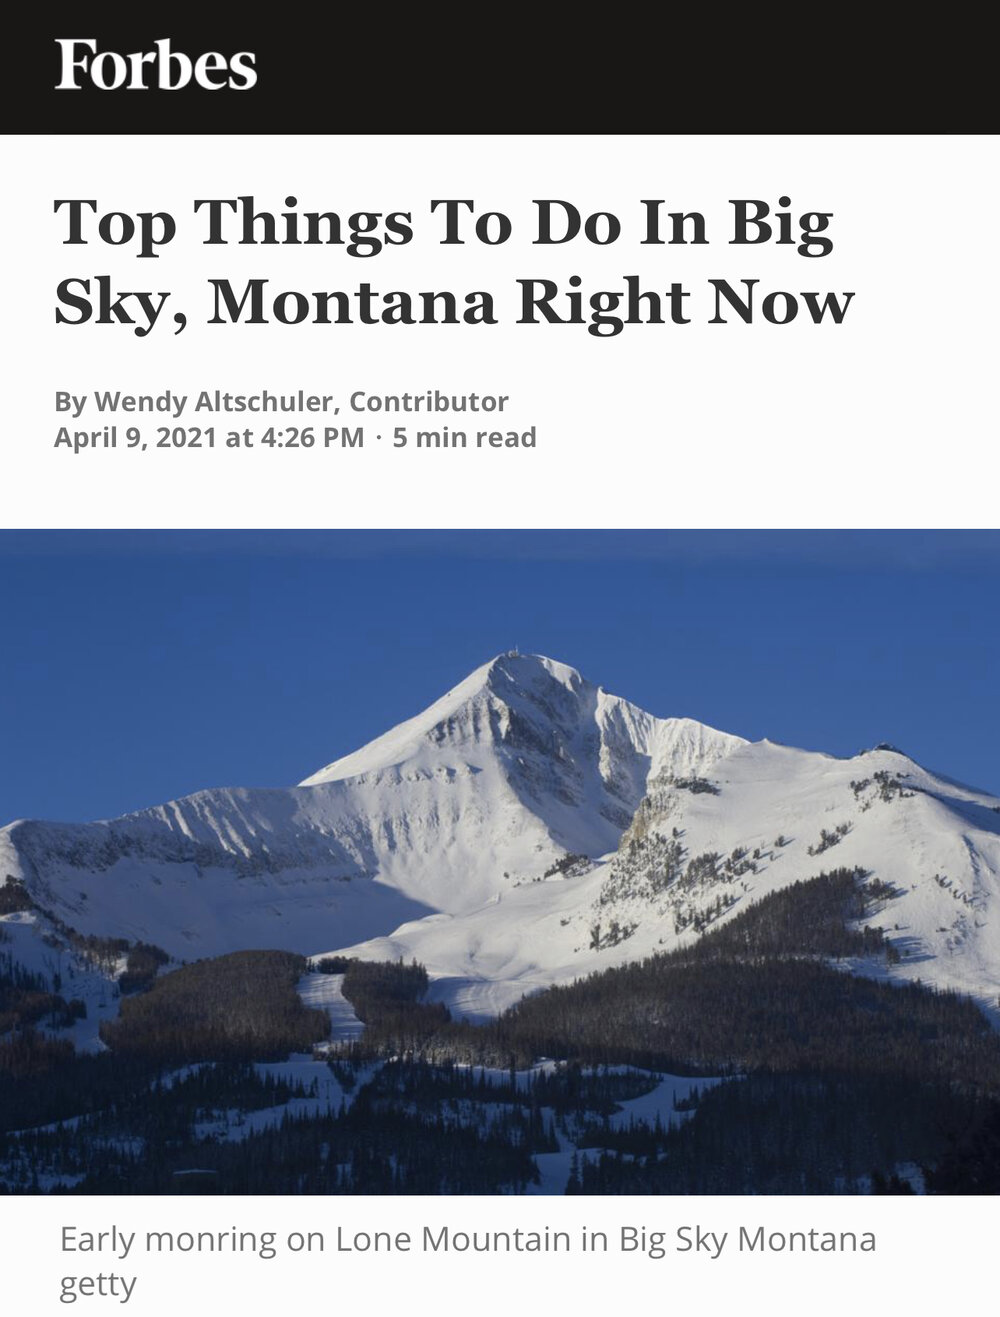 Top Things To Do In Big Sky, Montana Right Now